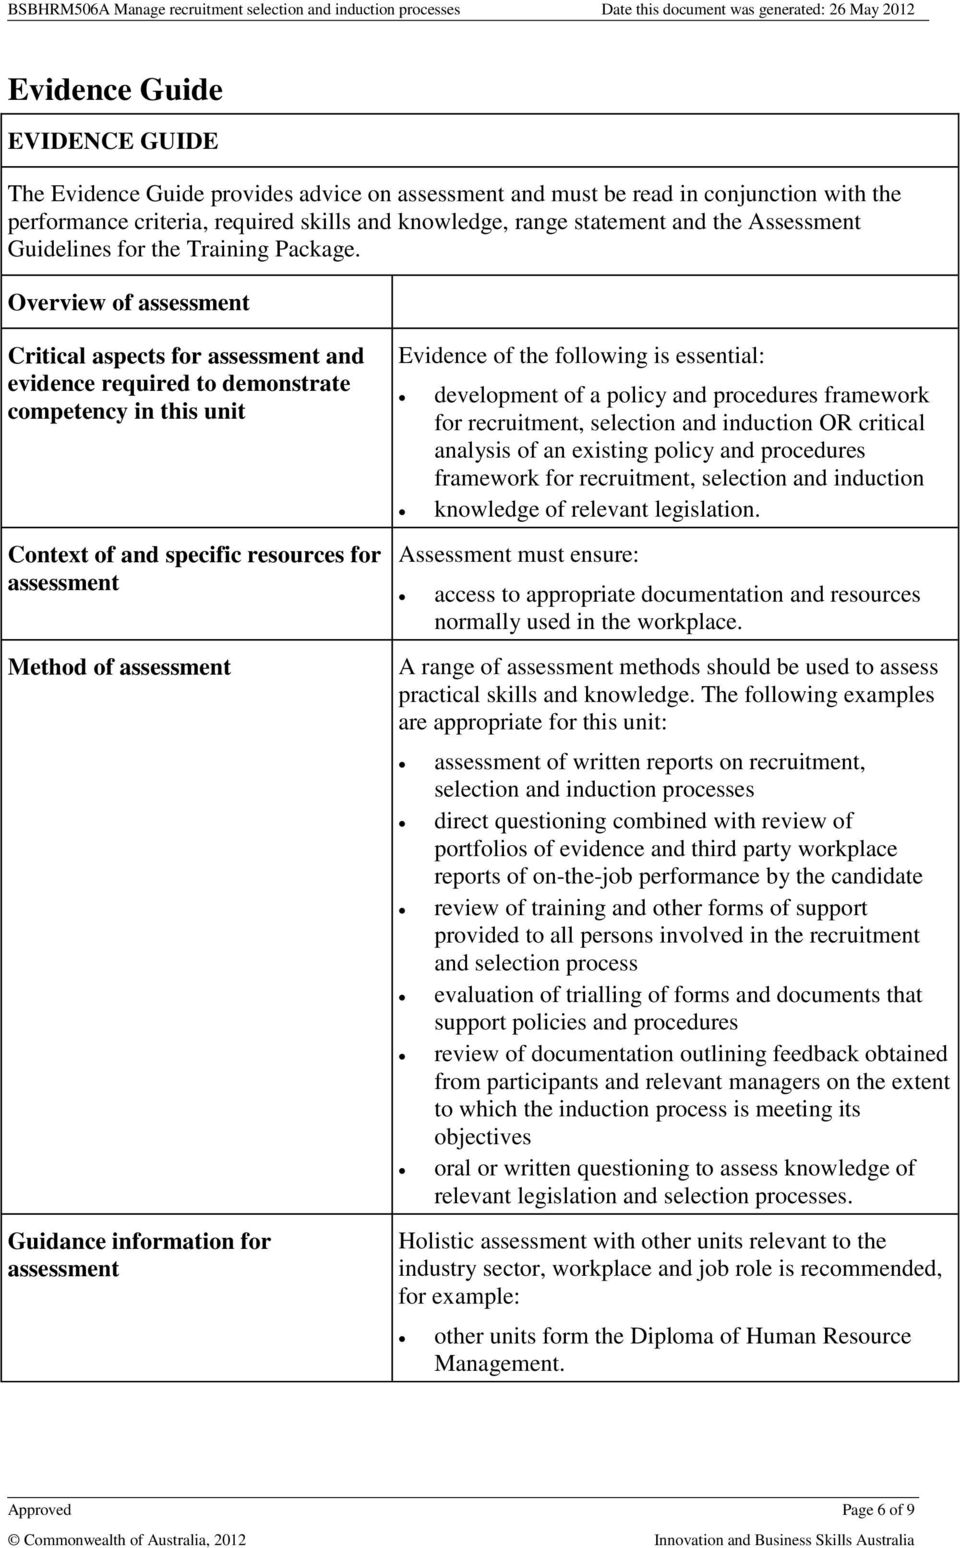 Overview of assessment Critical aspects for assessment and evidence required to demonstrate competency in this unit Context of and specific resources for assessment Method of assessment Guidance